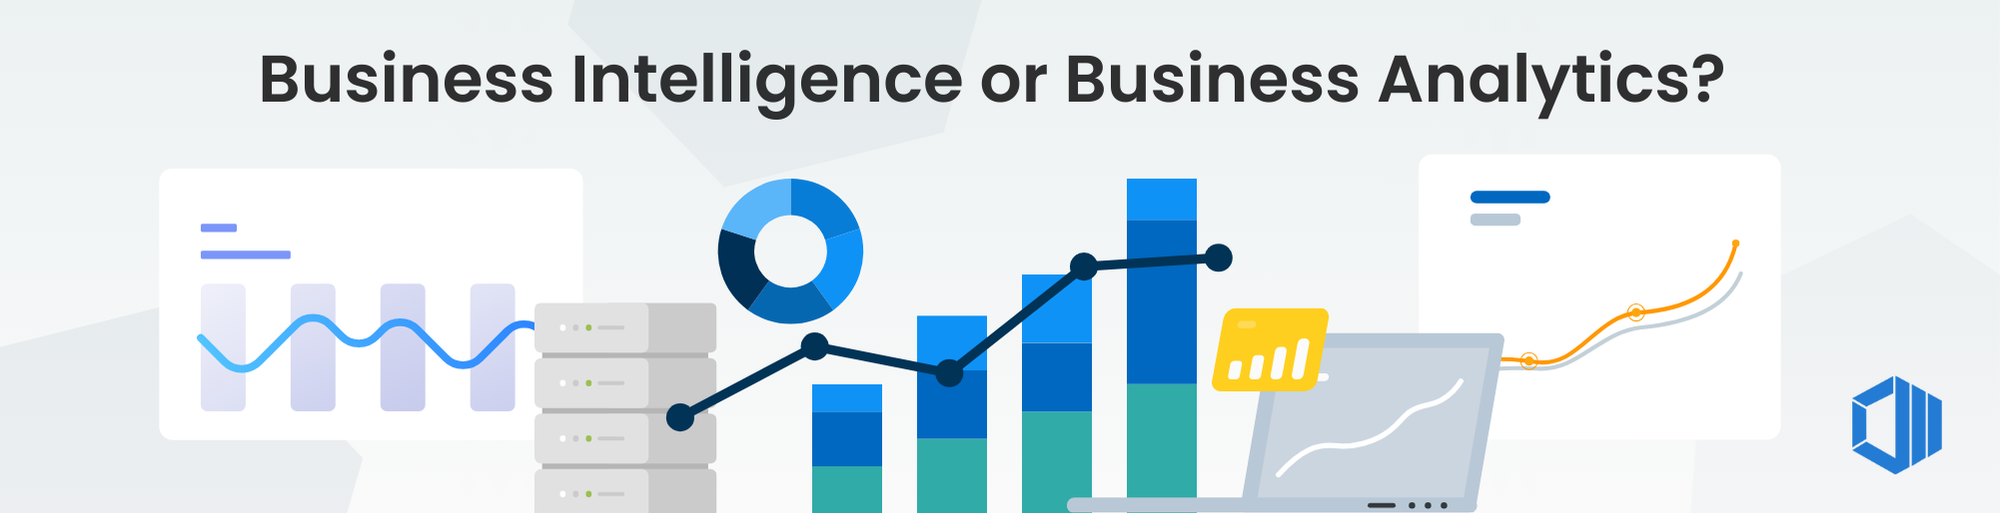 banner - Business Intelligence or Business Analytics